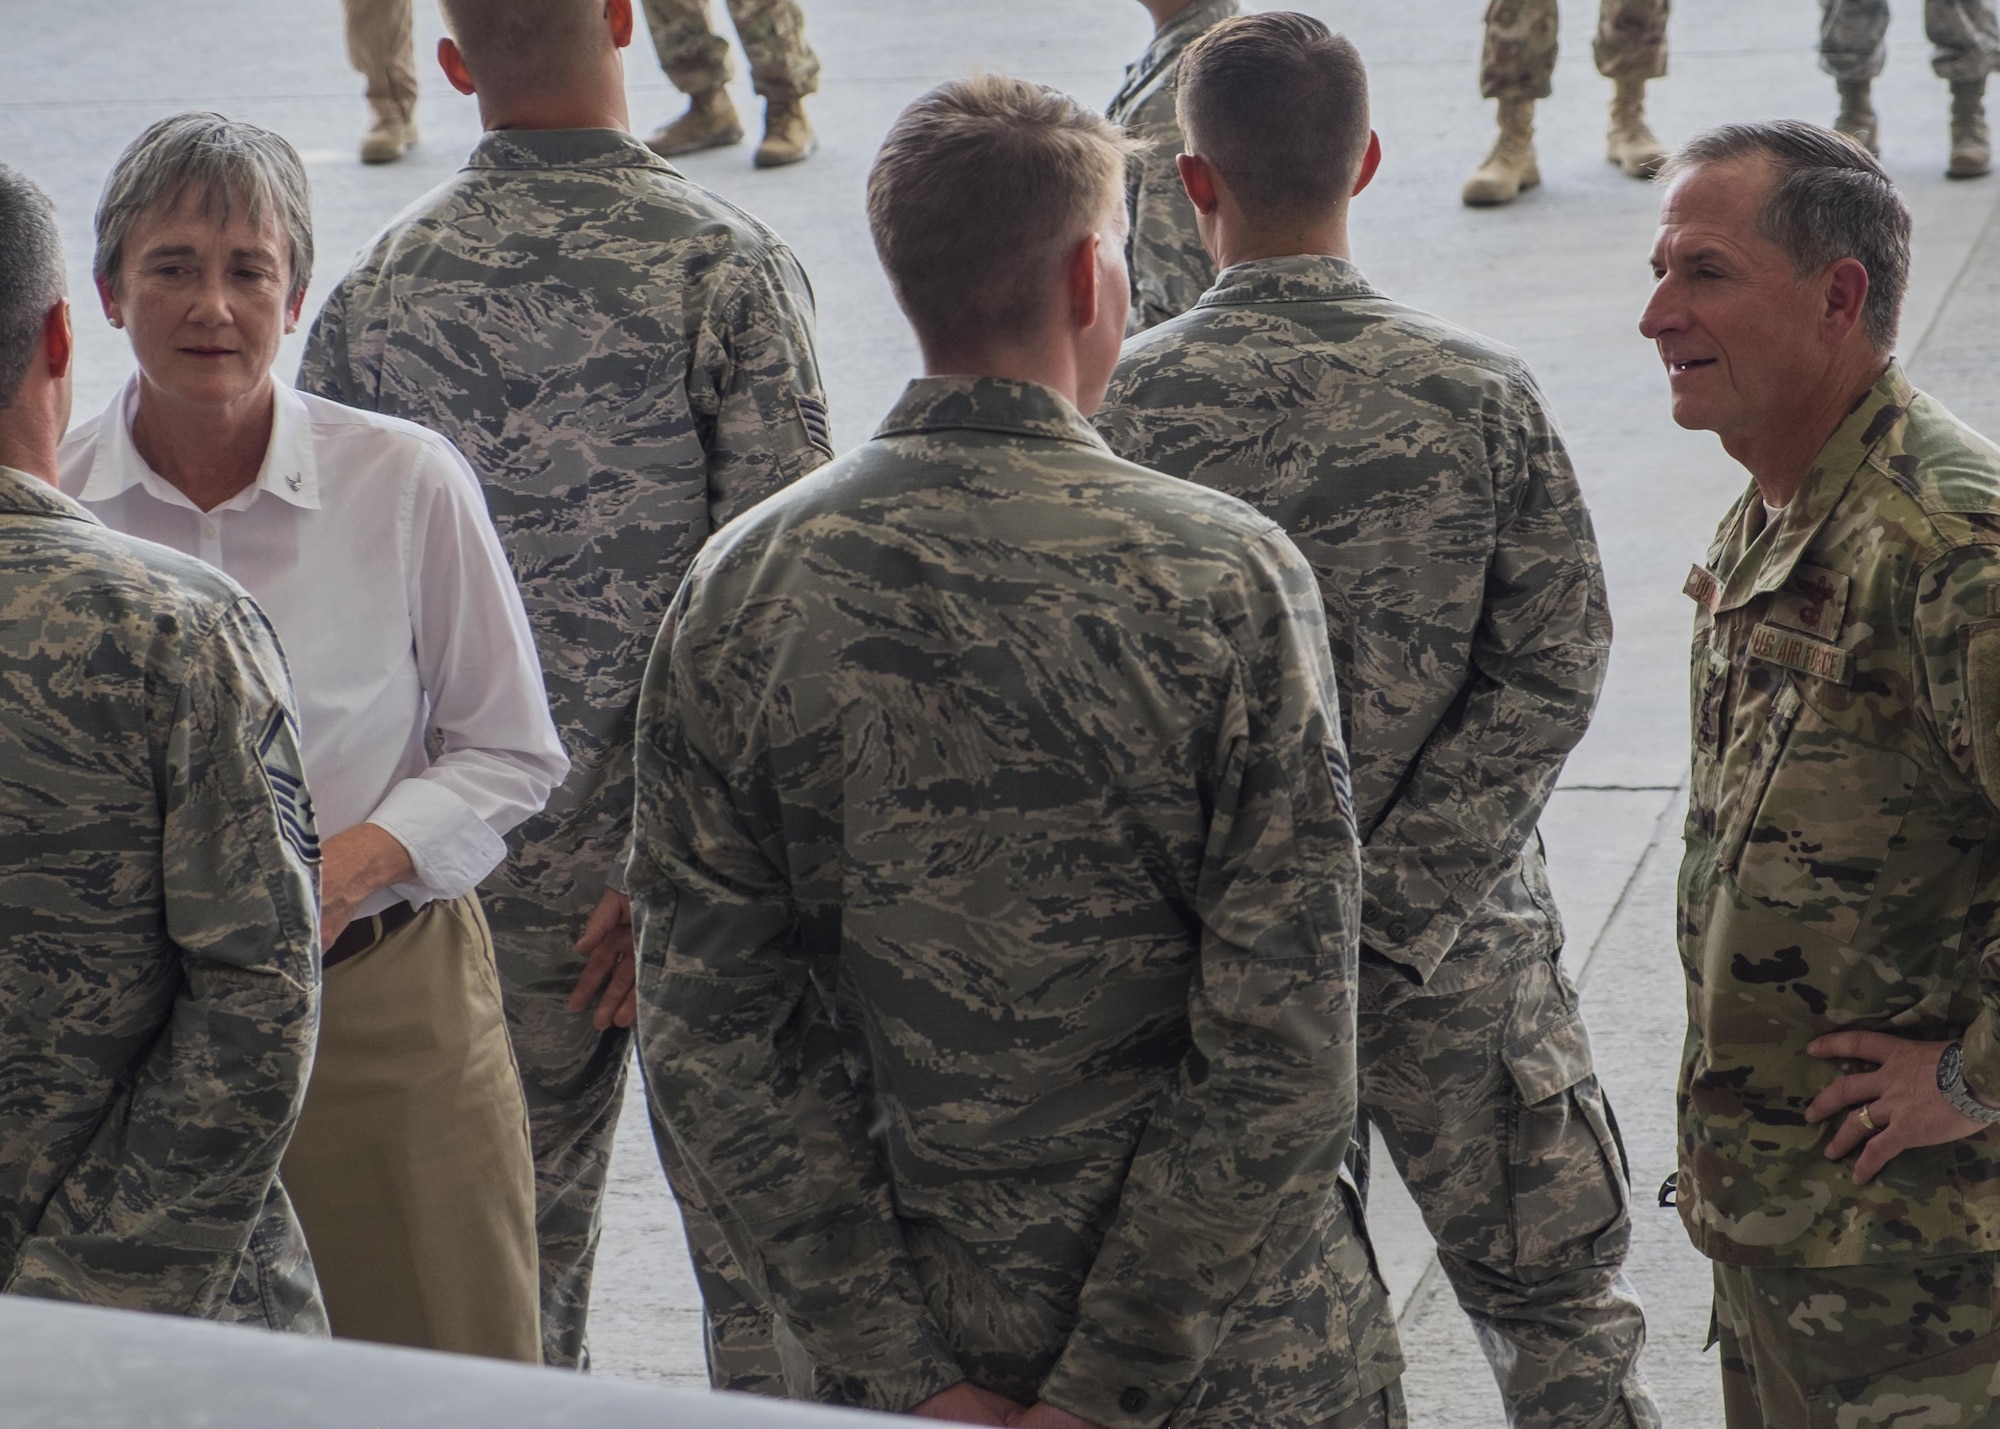 Secretary of the Air Force Heather Wilson, left, and Air Force Chief of Staff Gen. David L. Goldfein speak with Airmen from the 380th Air Expeditionary Wing Aug. 18, 2017, Al Dhafra Air Base, United Arab Emirates.